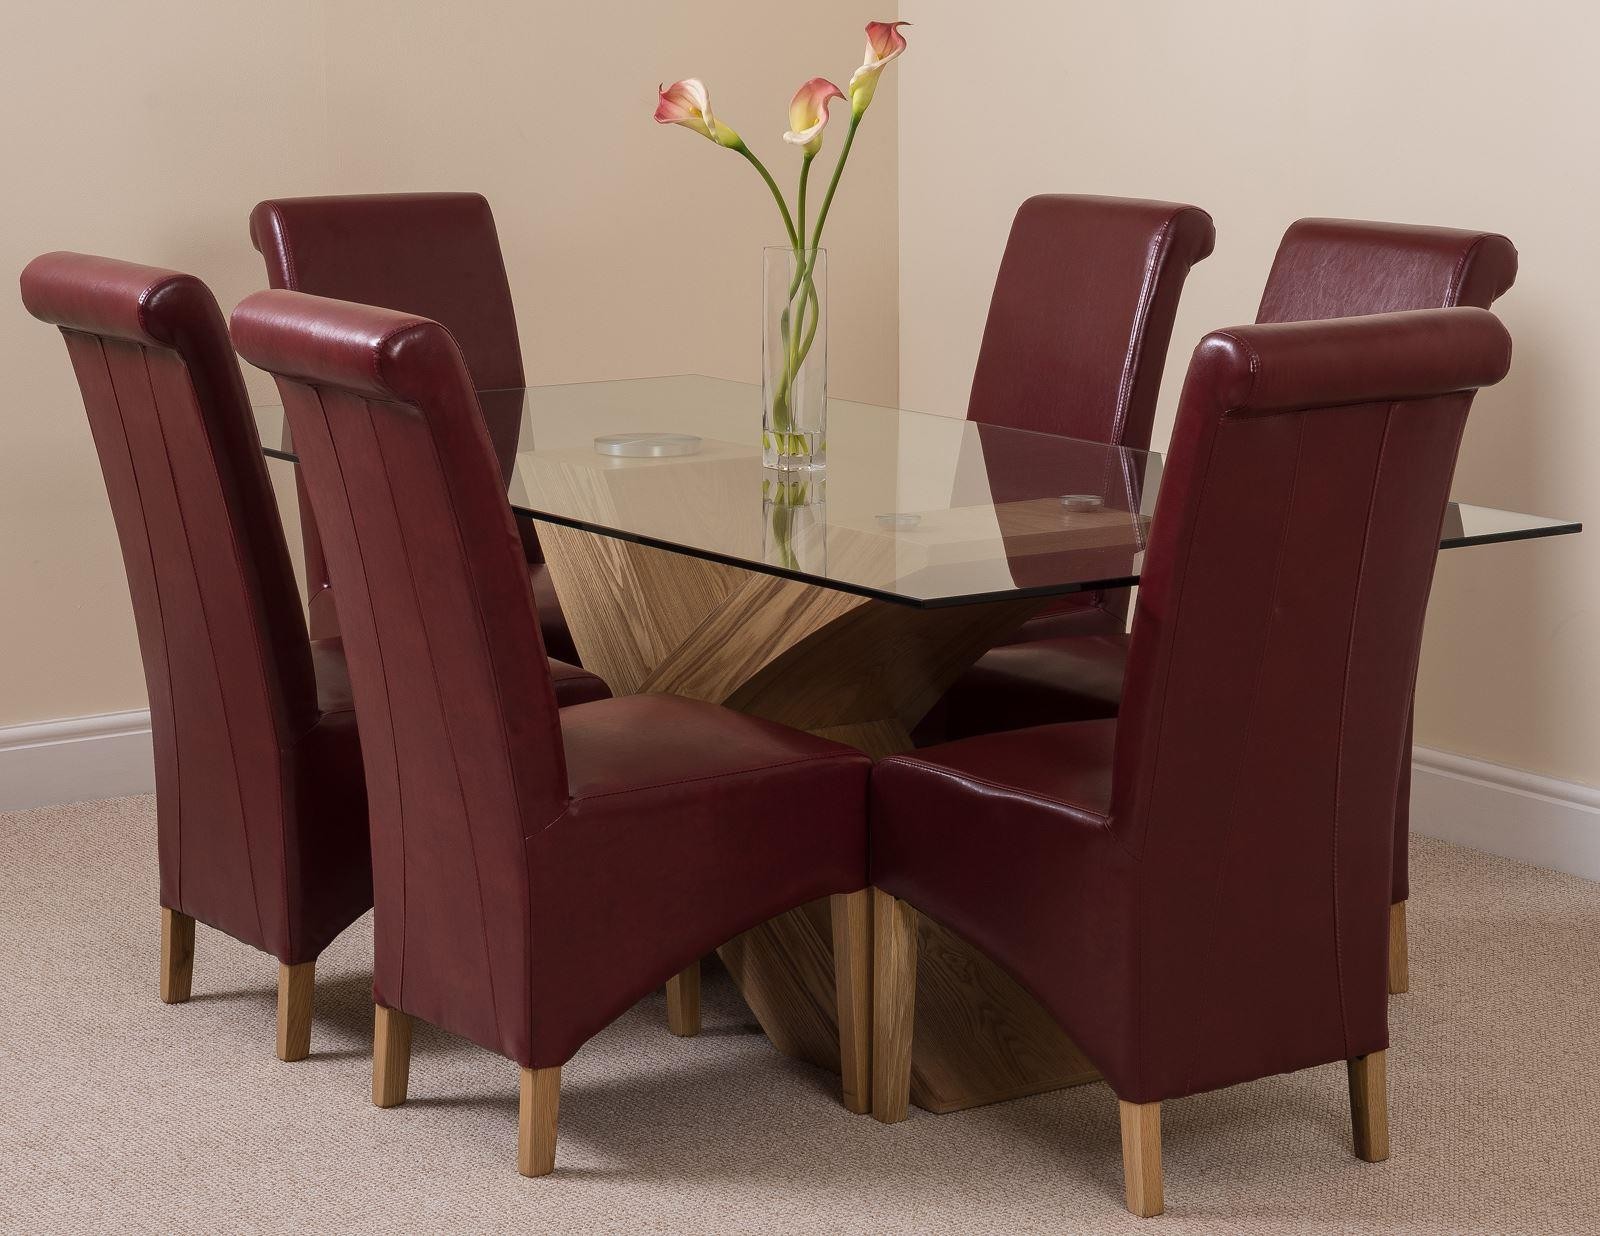 Valencia Oak 200cm Wood and Glass Dining Table with 6 Montana Dining Chairs [Burgundy Leather]